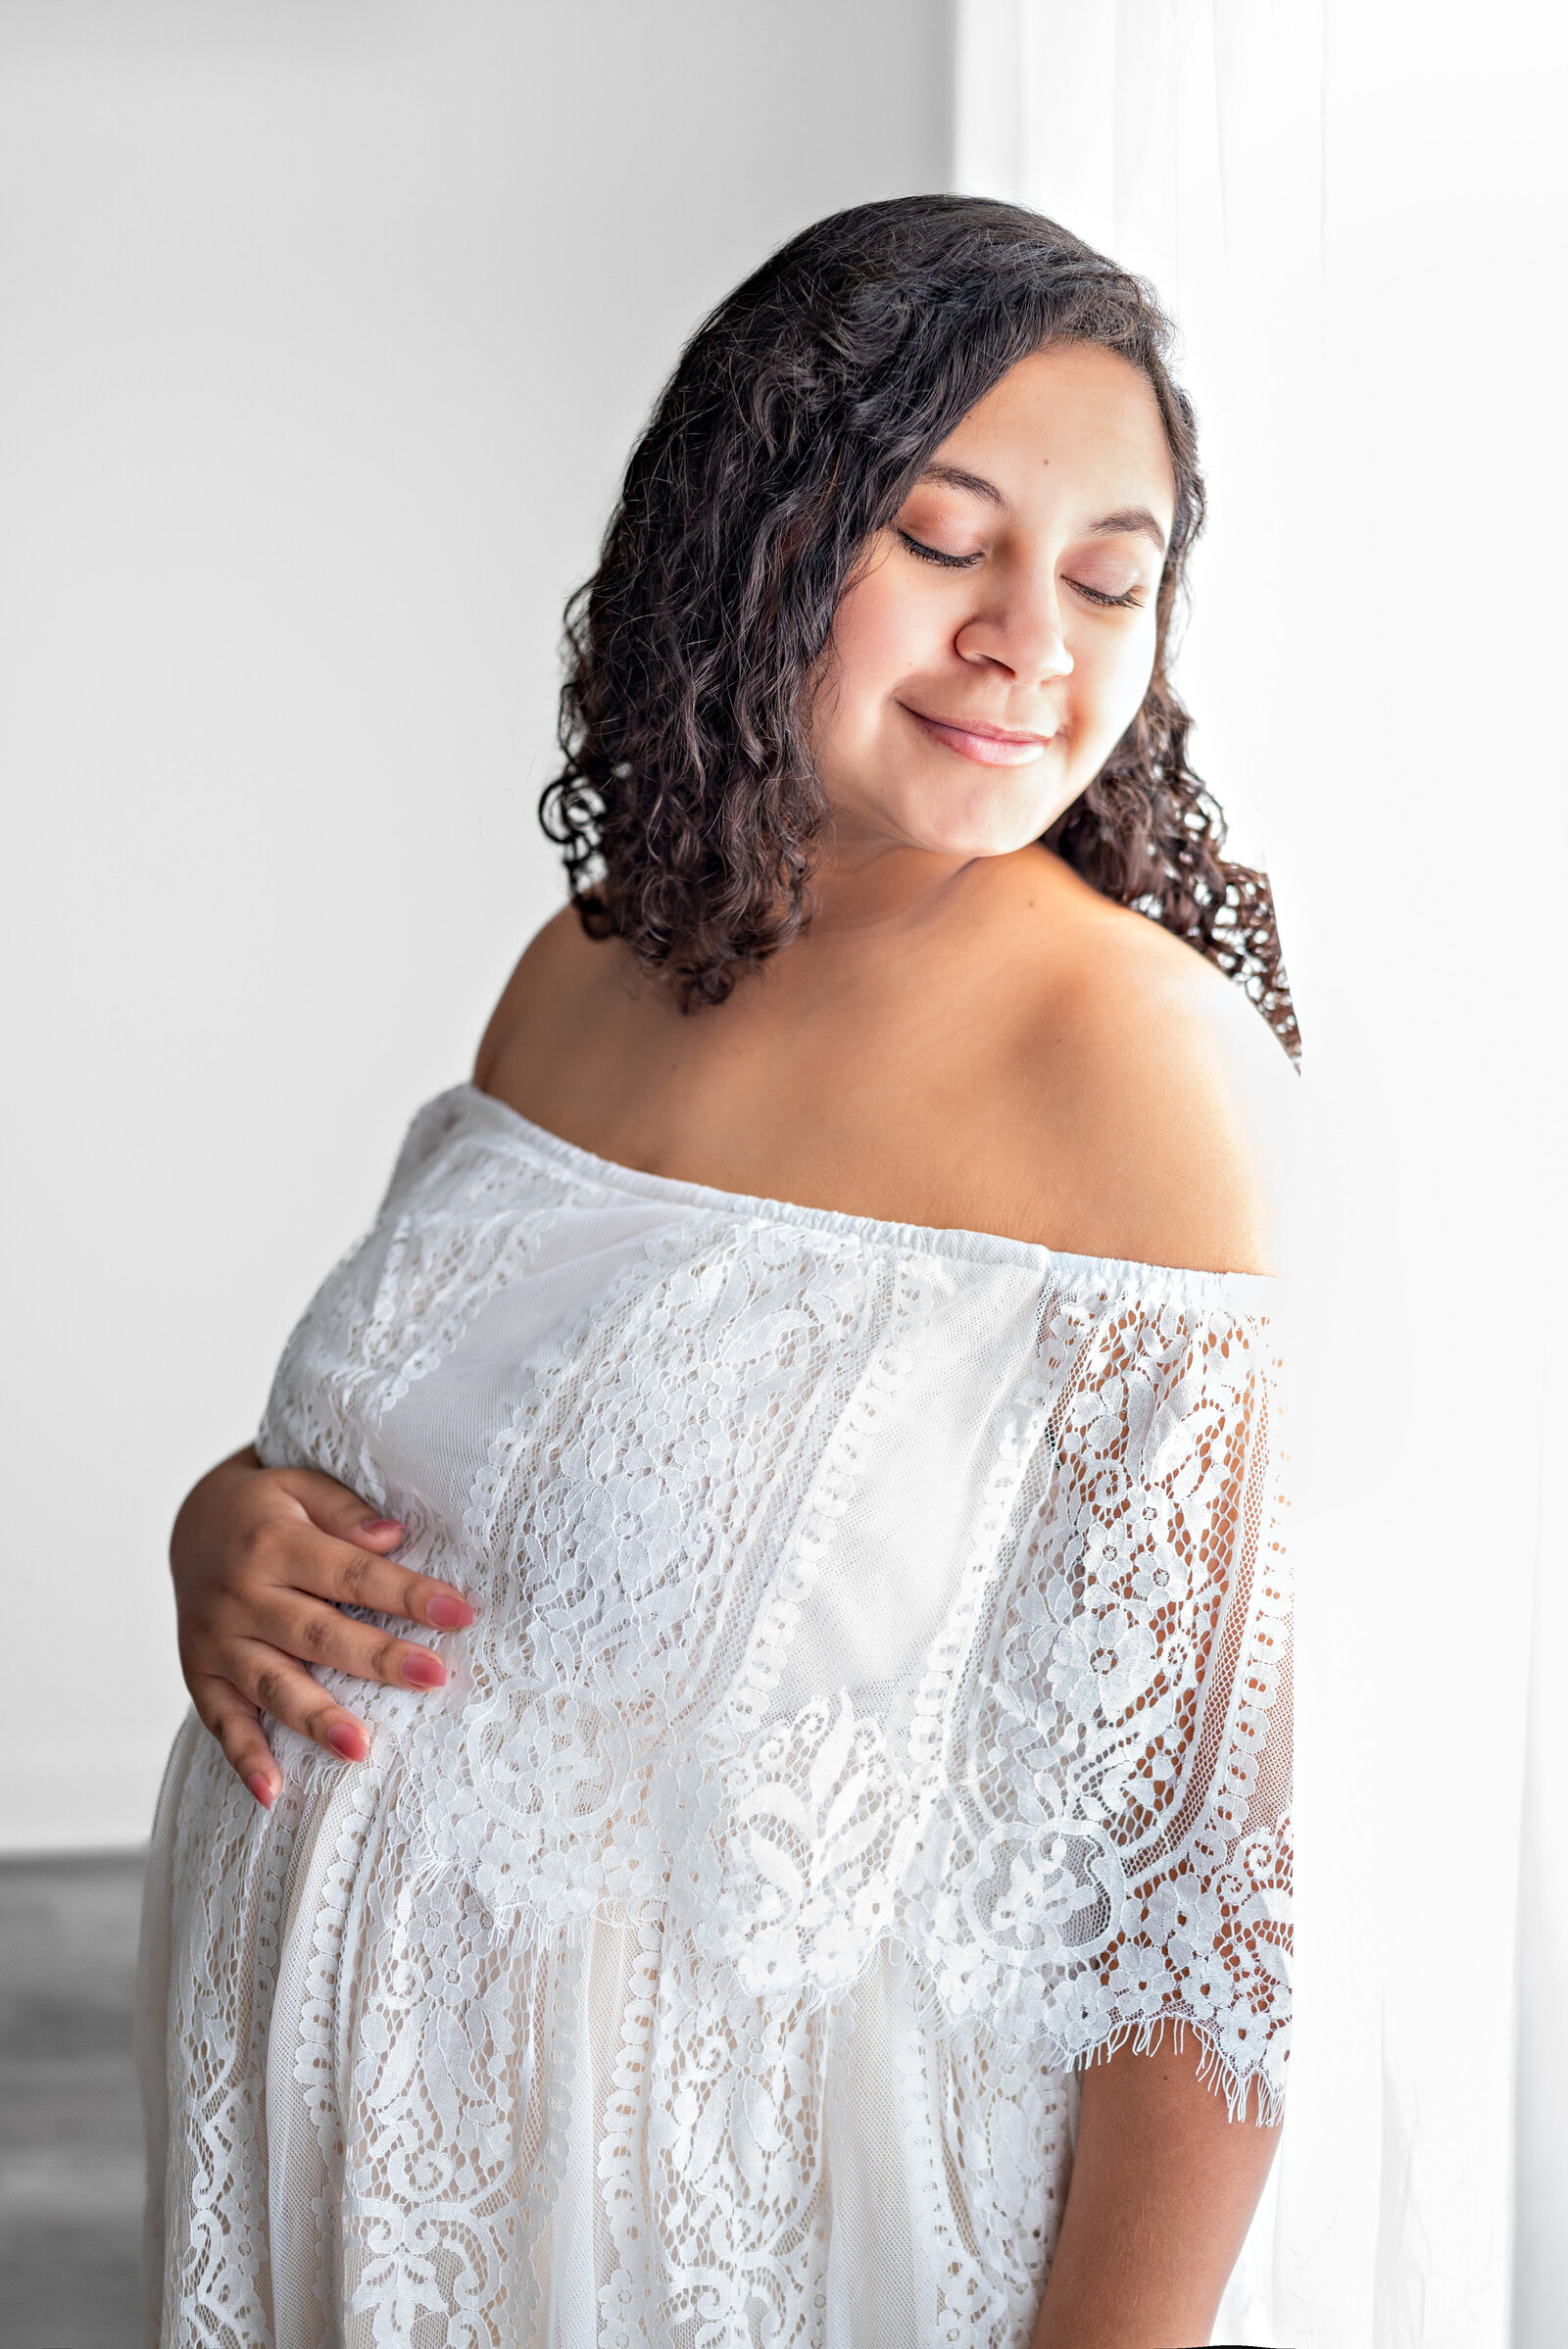 mother caressing her stomach as she poses for her maternity photos